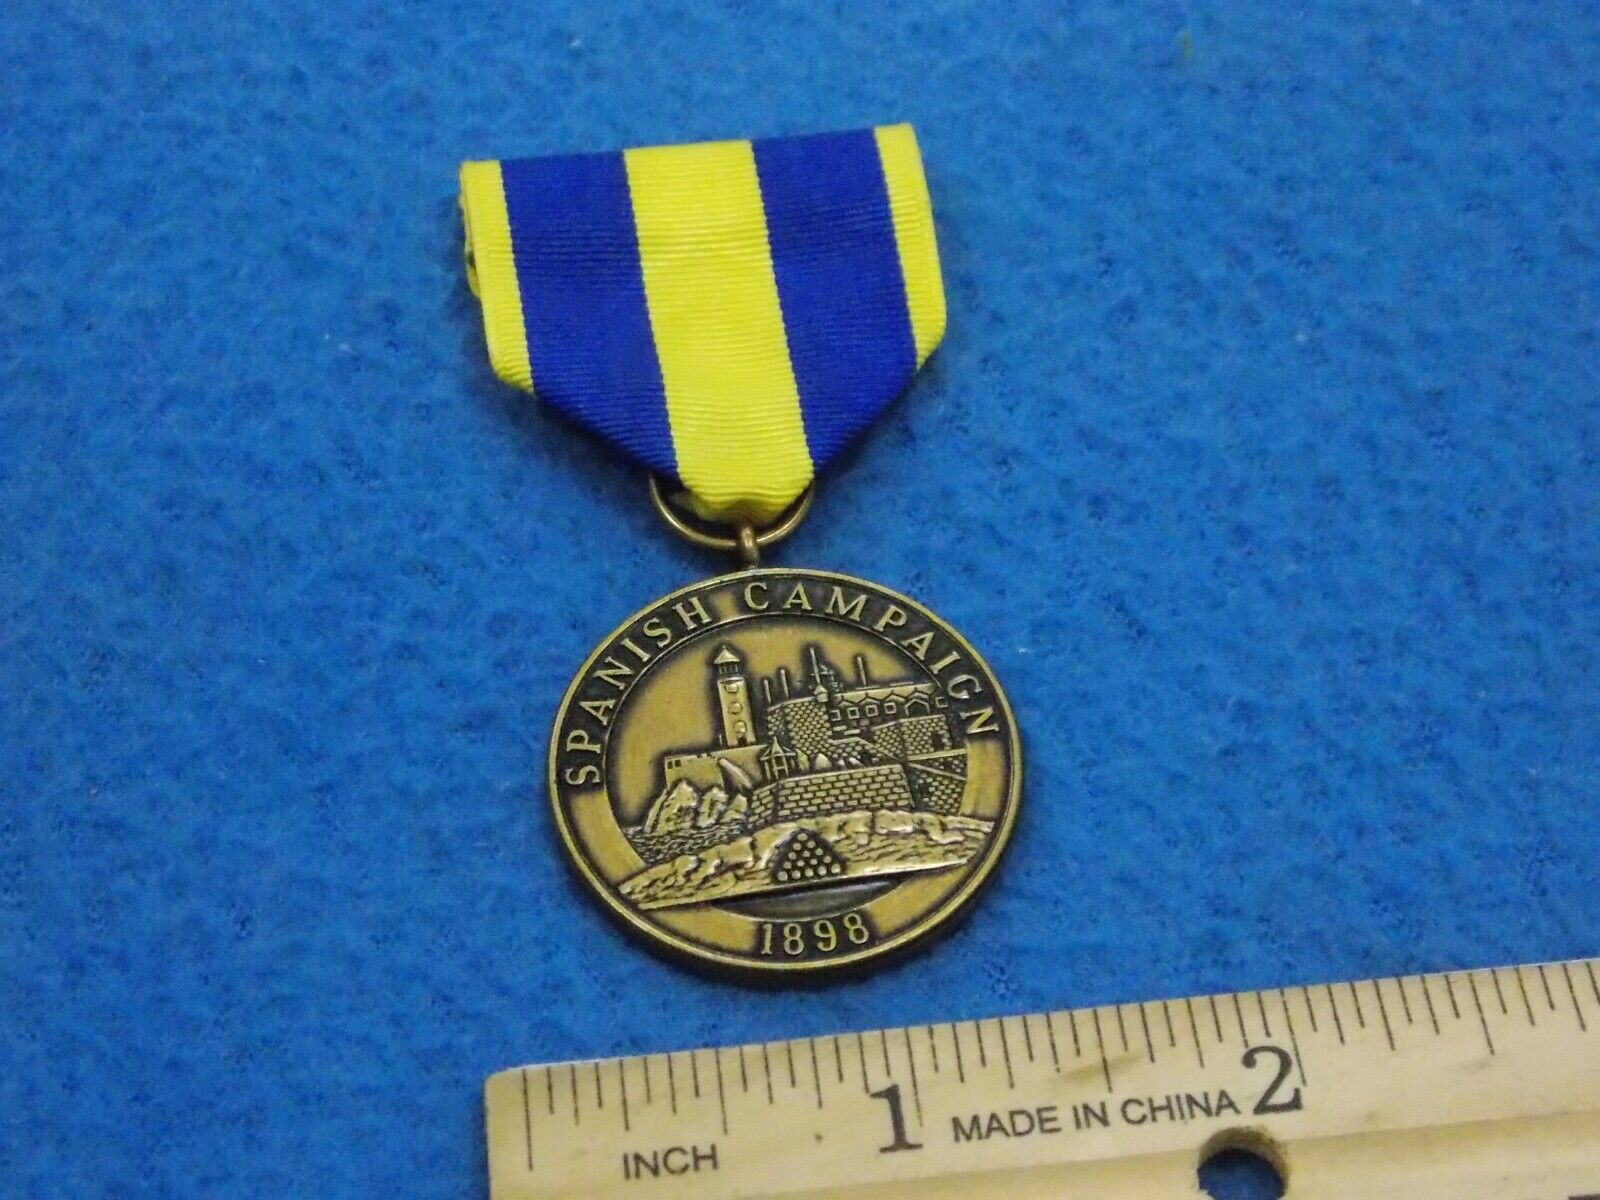 1898 - SPANISH CAMPAIGN NAVY MEDAL - GRACO